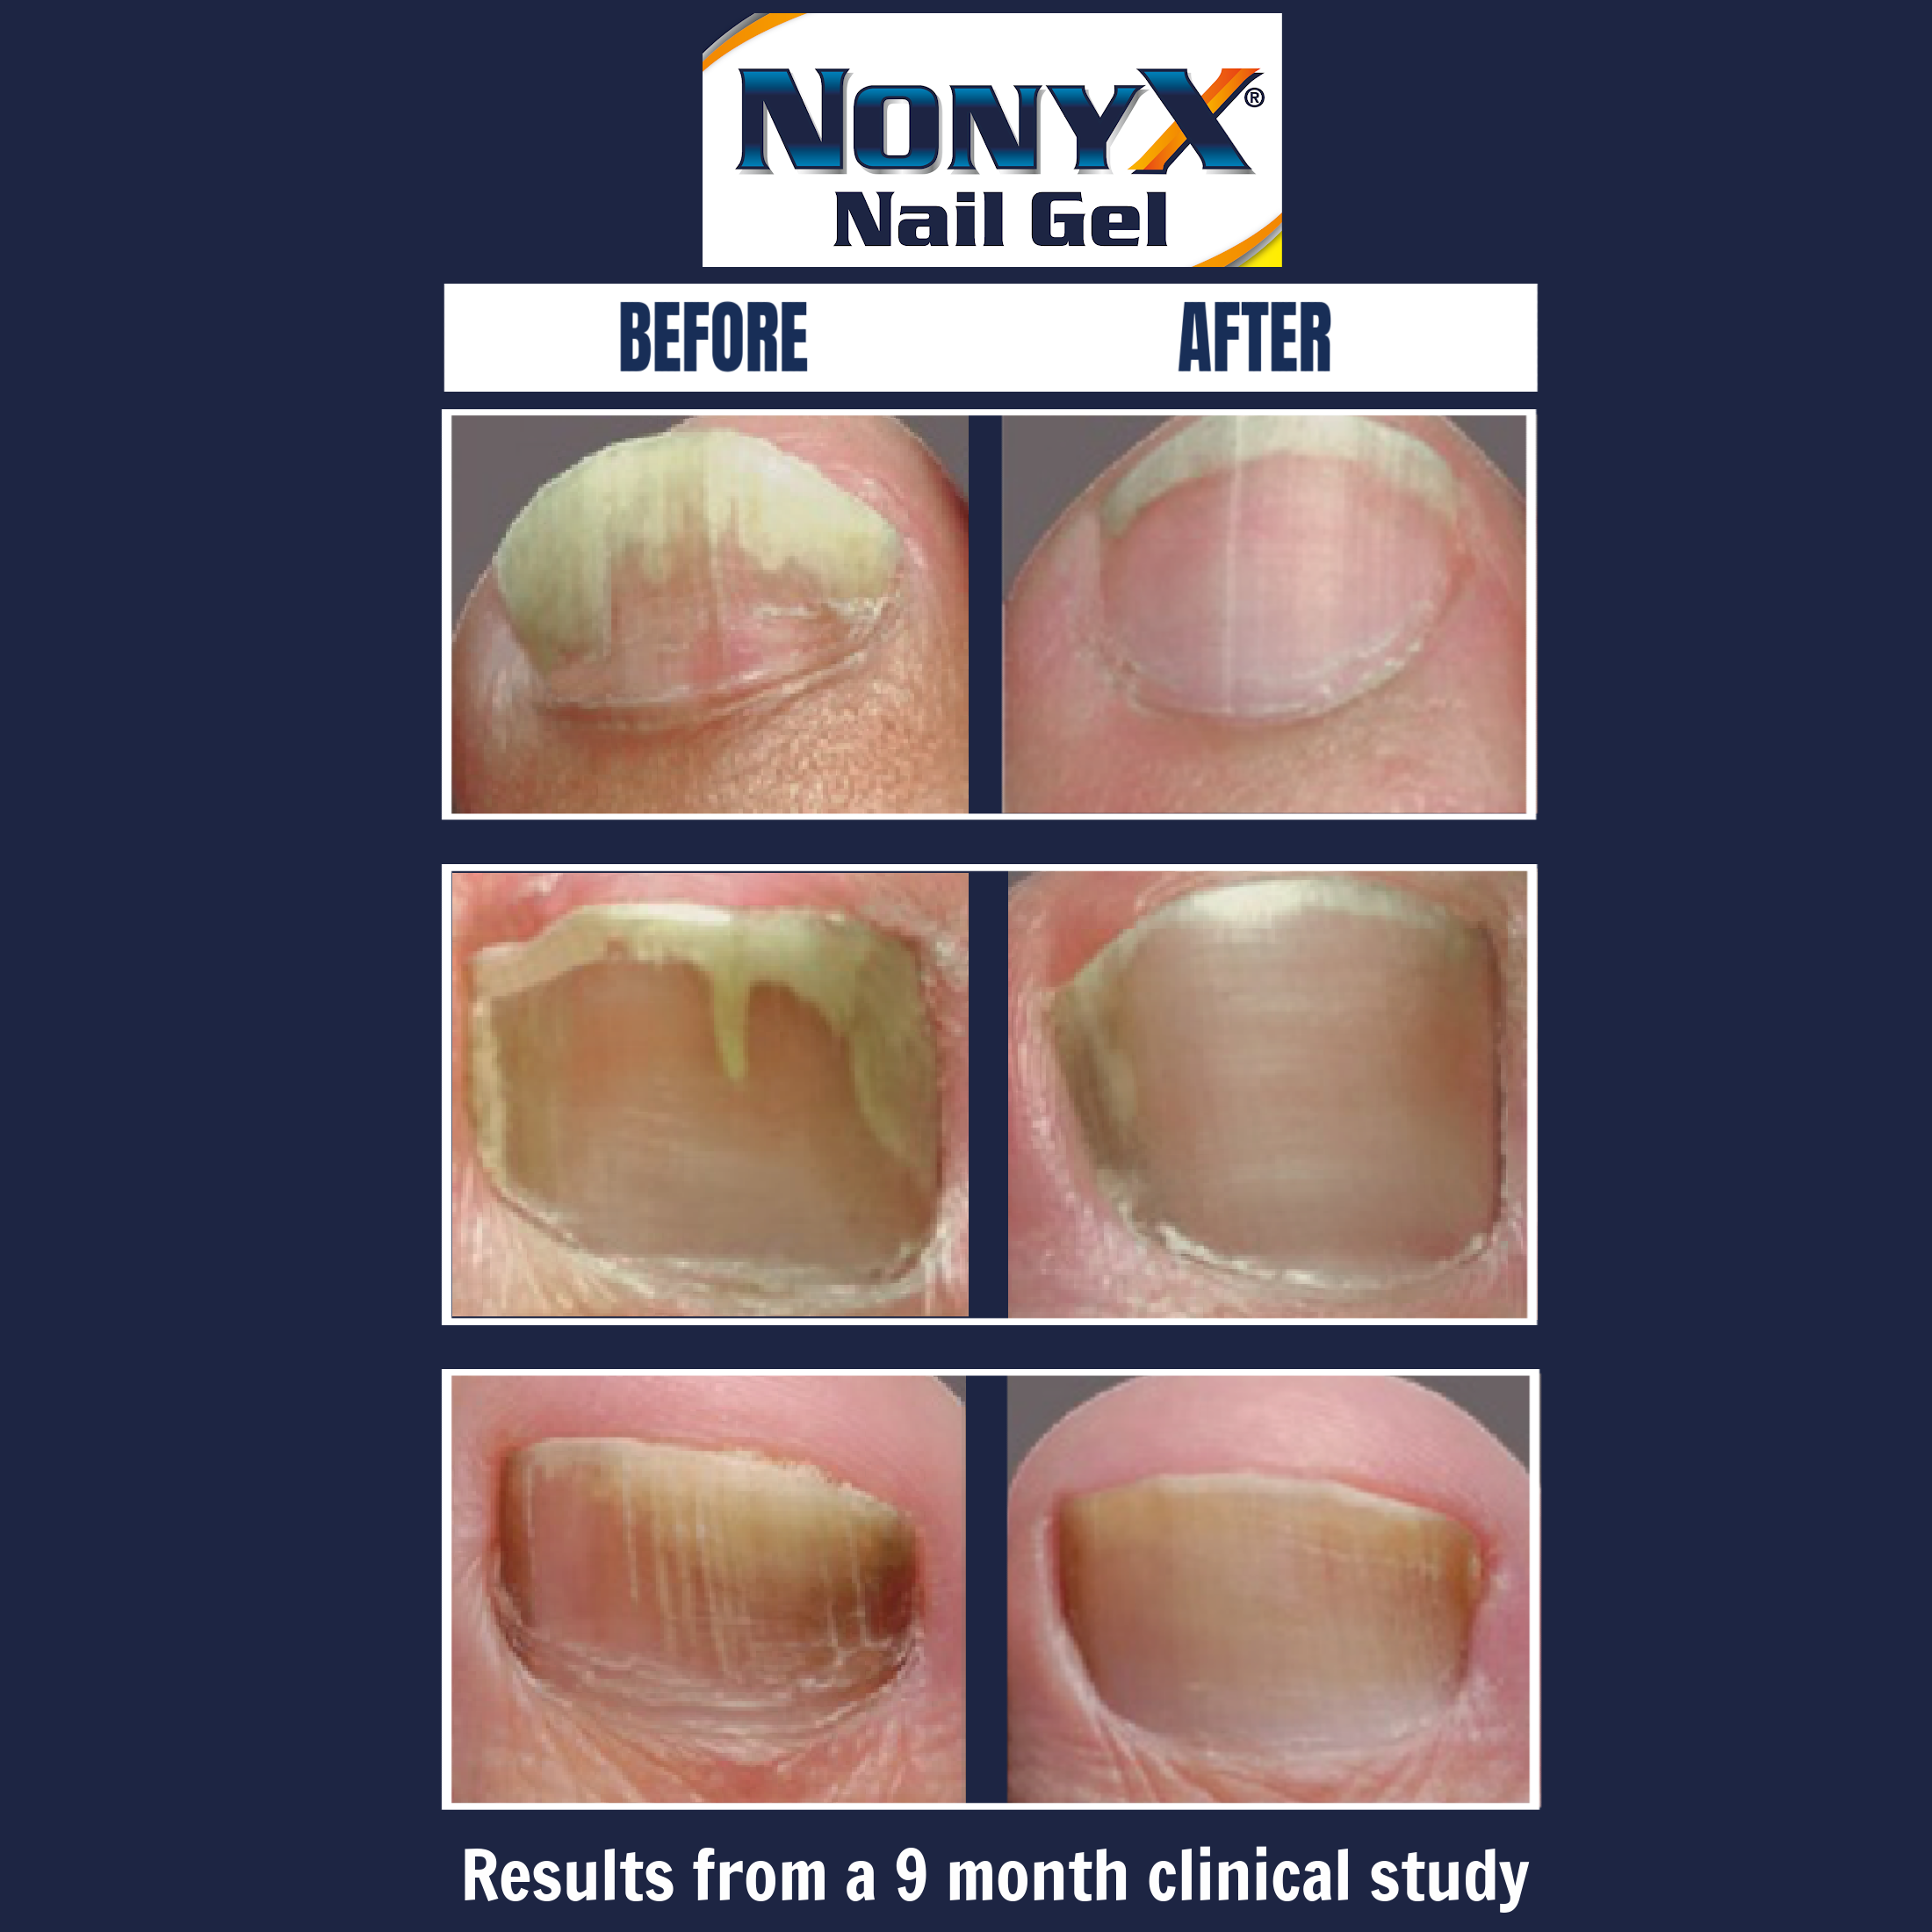 Nonyx Fungal Nail Clarifying Gel | Clinically Proven Effective for Fungus Damaged Toenails | Results are Money-back Guaranteed, 4 oz. - image 3 of 9